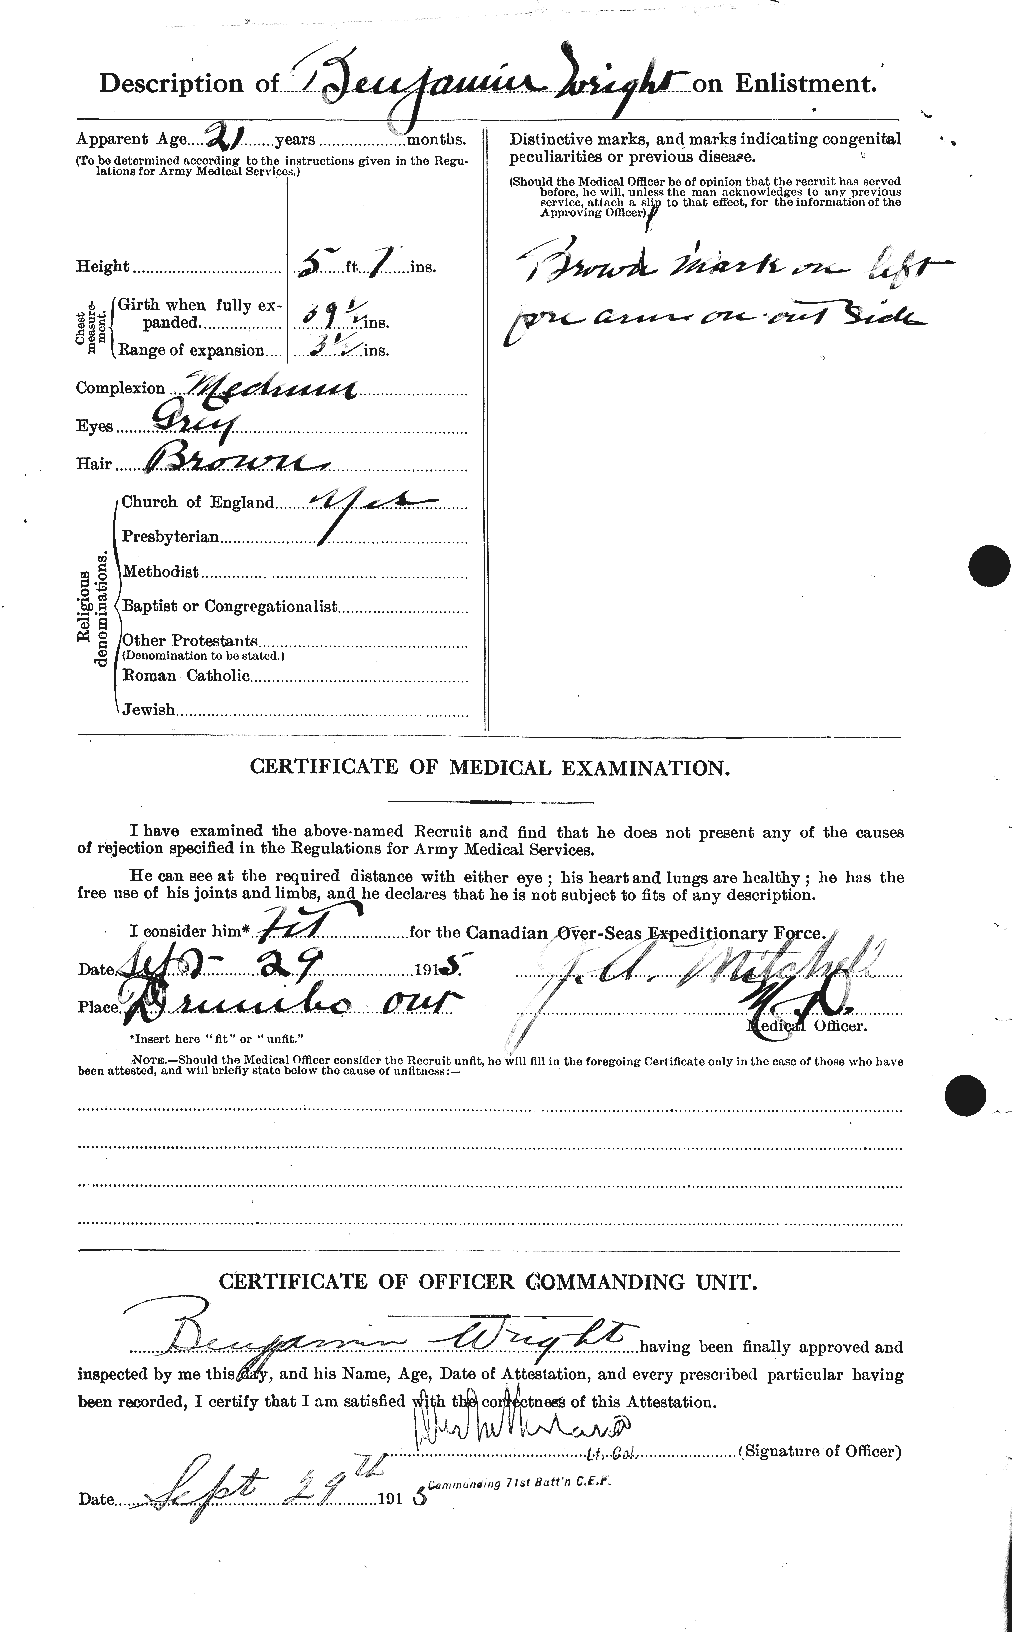 Personnel Records of the First World War - CEF 688198b